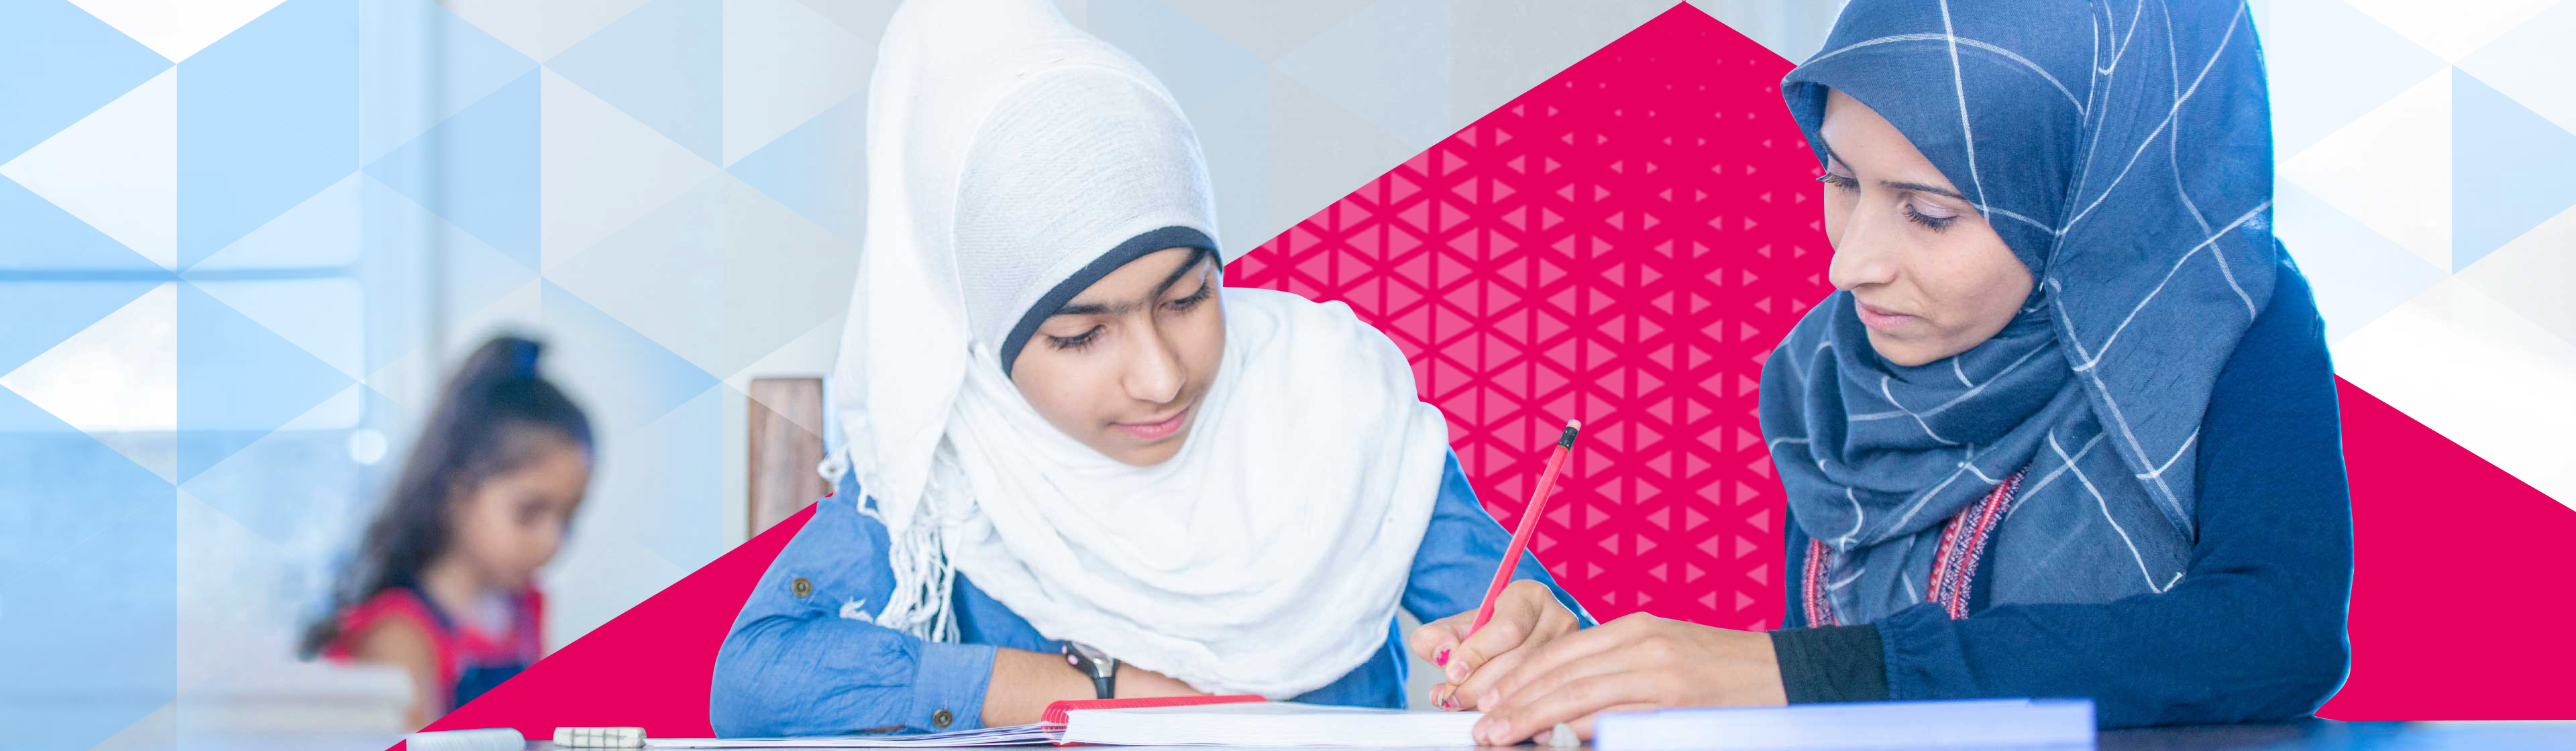 Child wearing a hijab writing in a notebook